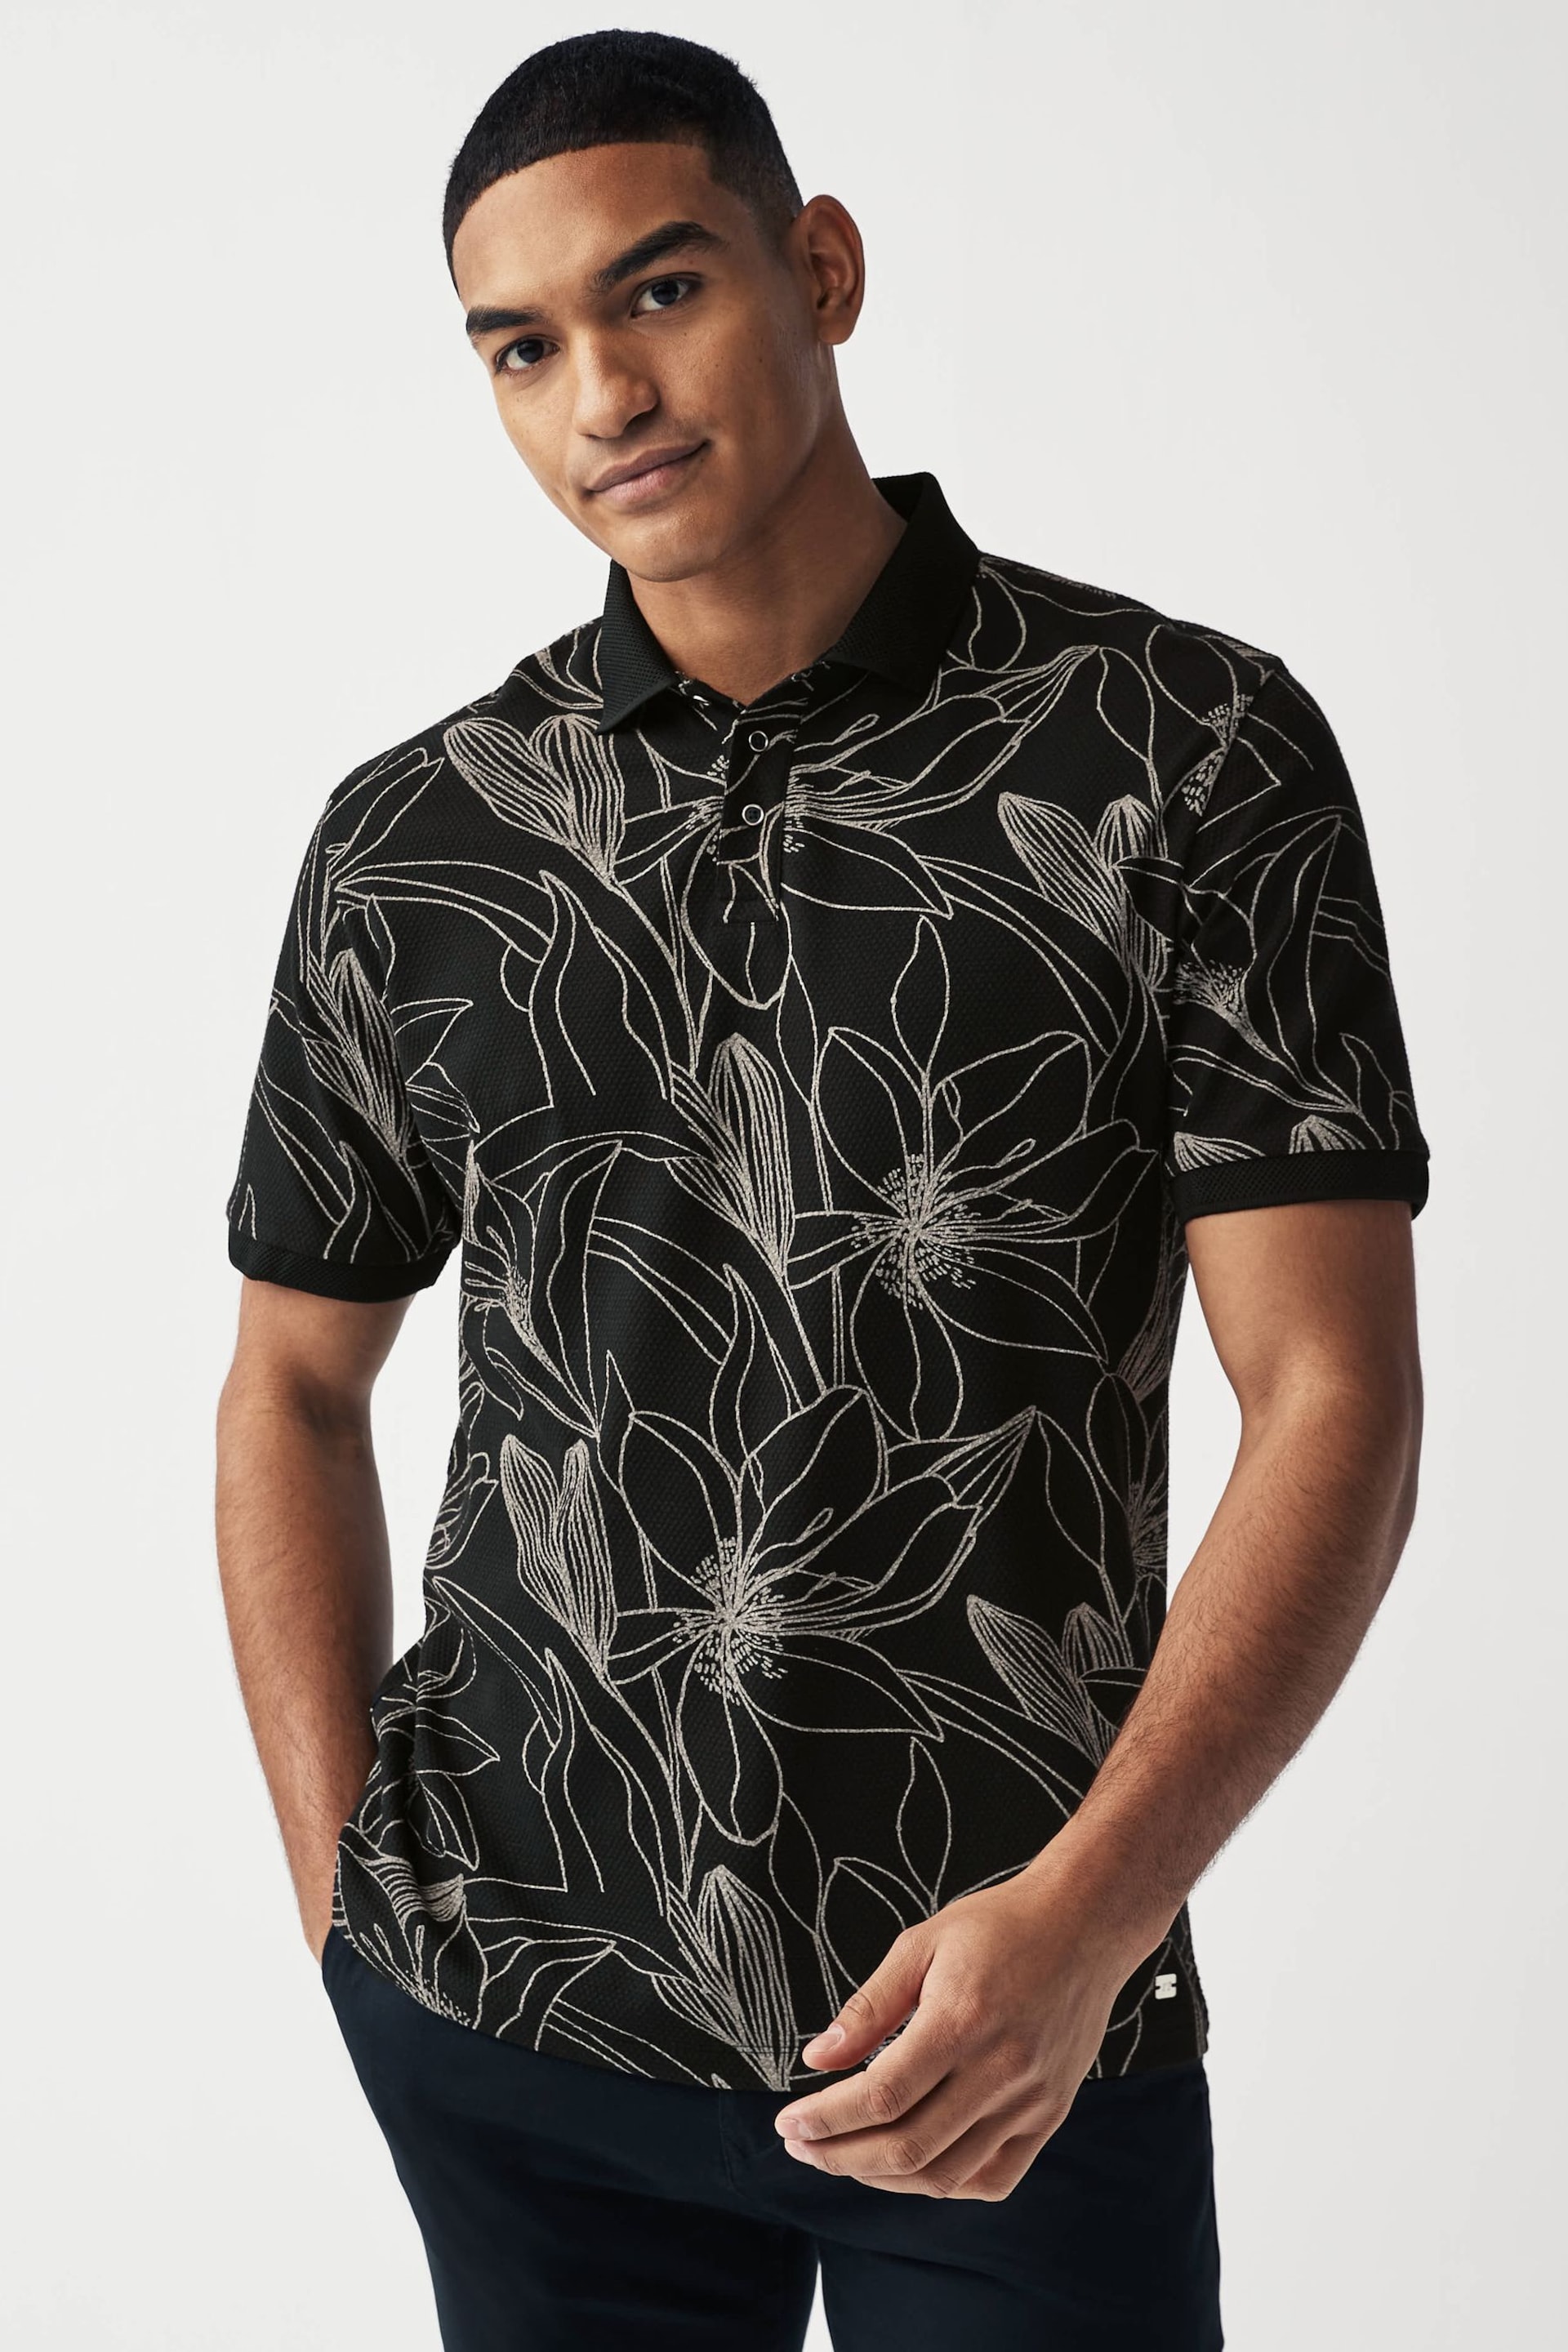 Black/White Floral Print Textured Polo Shirt - Image 2 of 8